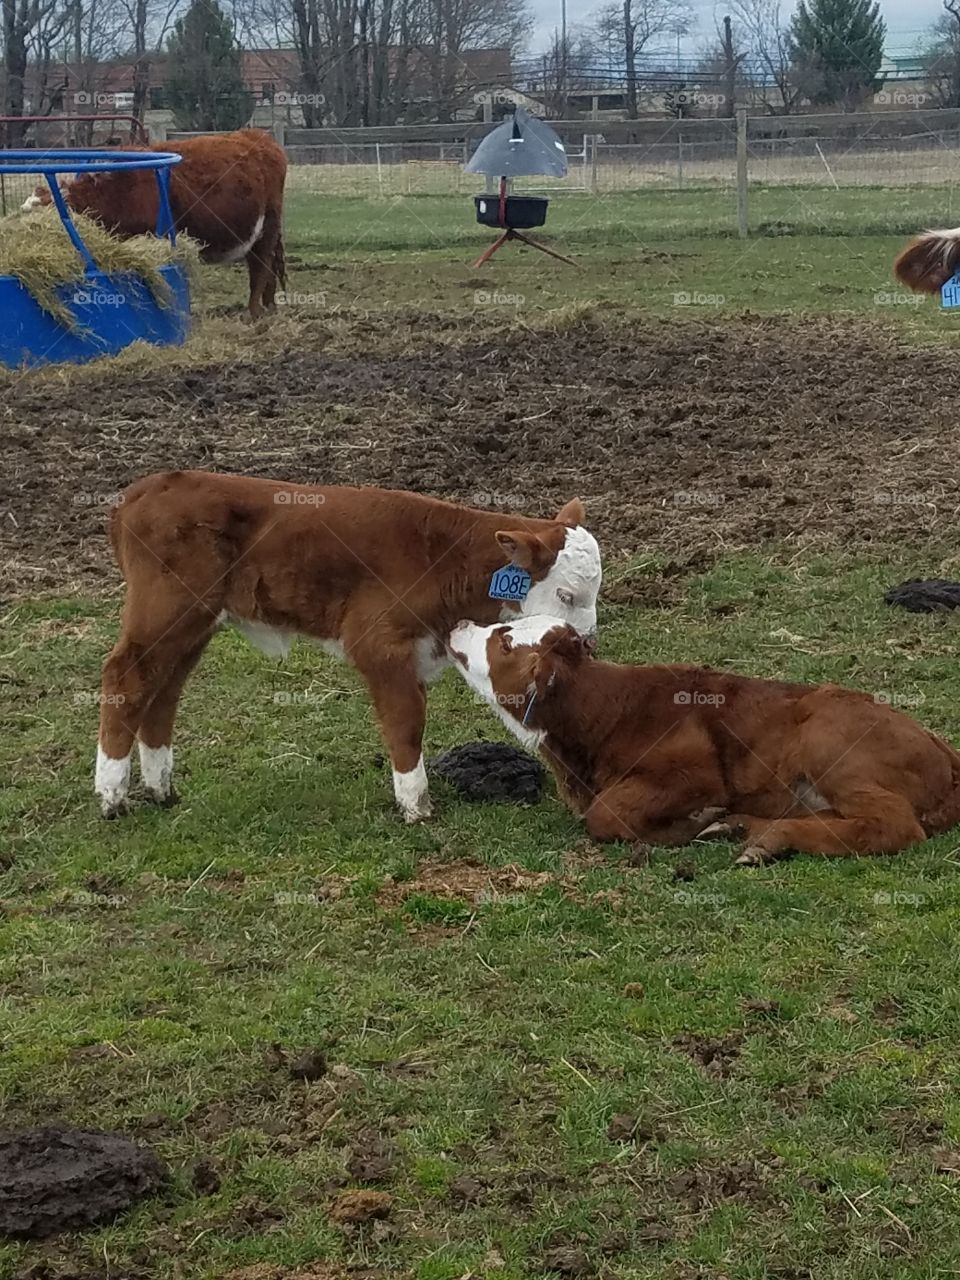 Baby cows finding love.